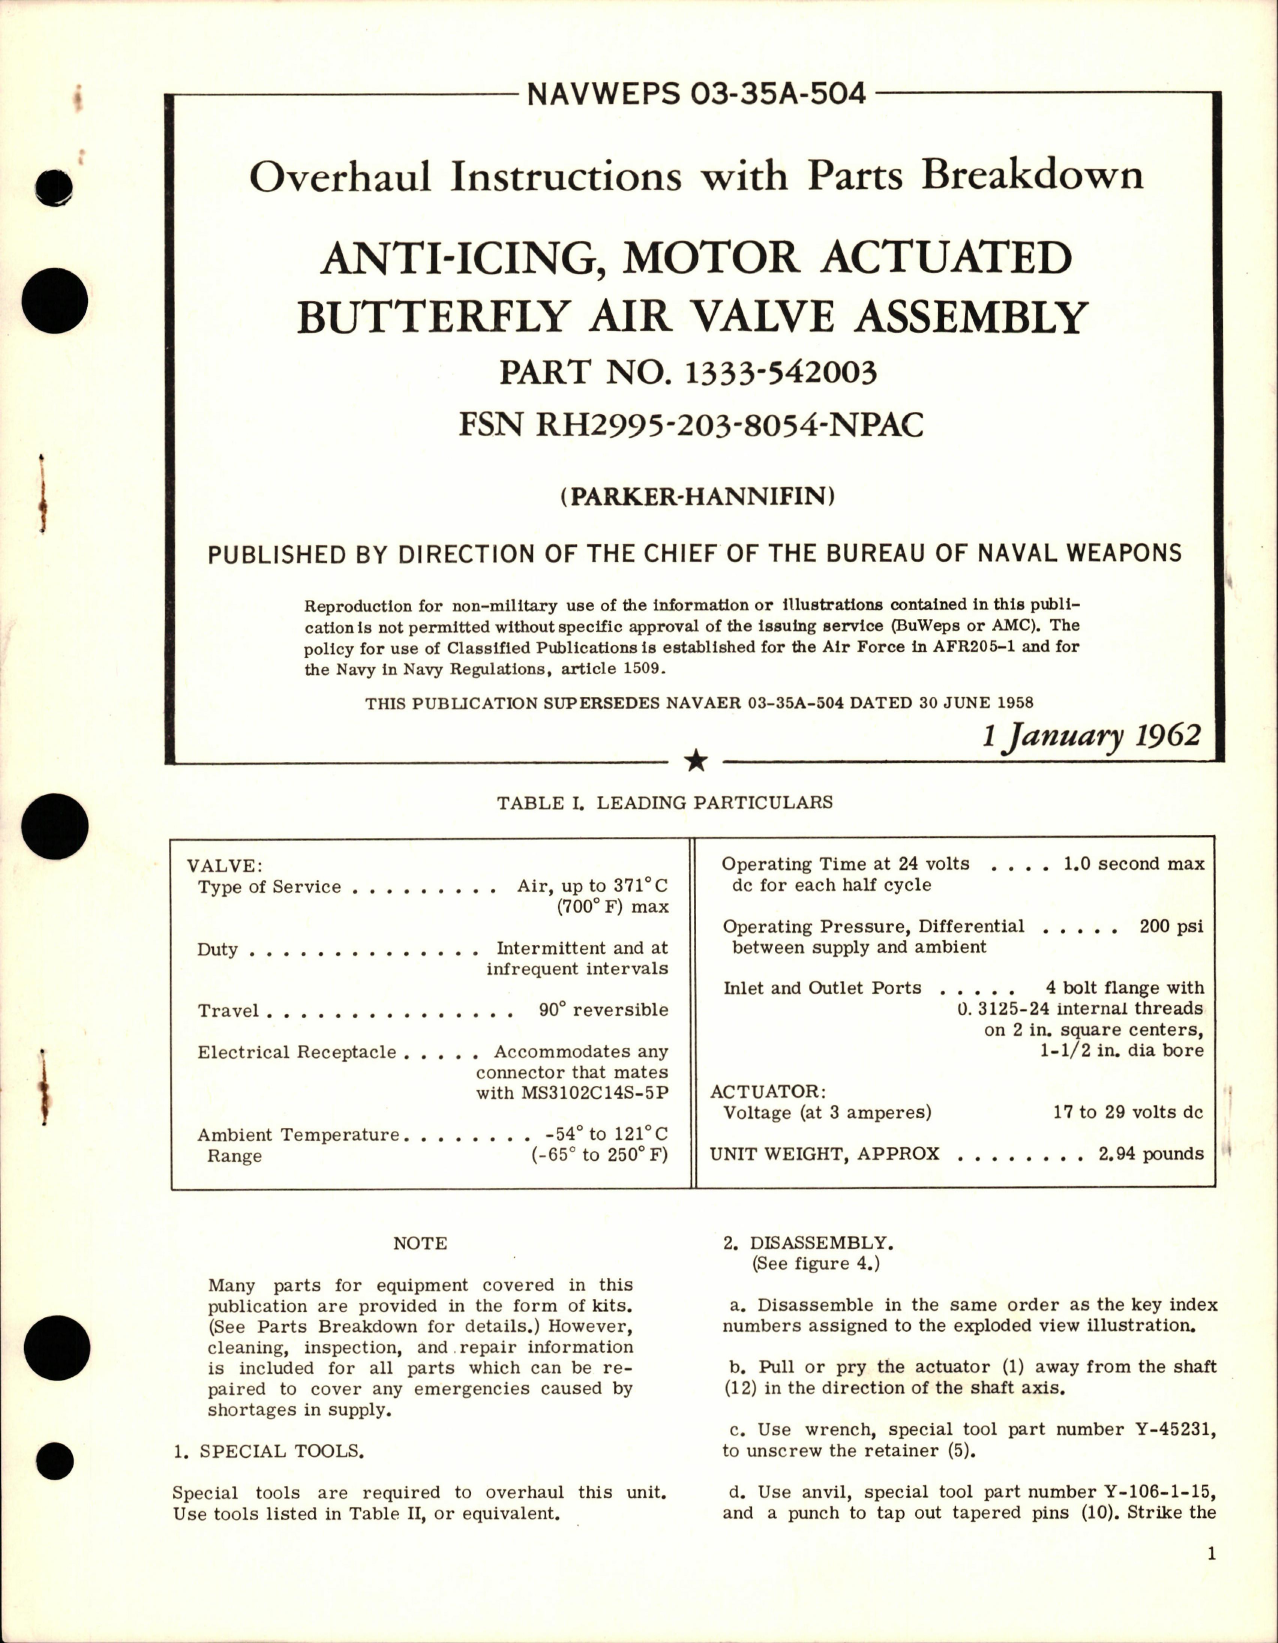 Sample page 1 from AirCorps Library document: Overhaul Instructions with Parts for Anti-Icing Motor Actuated Butterfly Air Valve Assembly - Part 1333-542003 